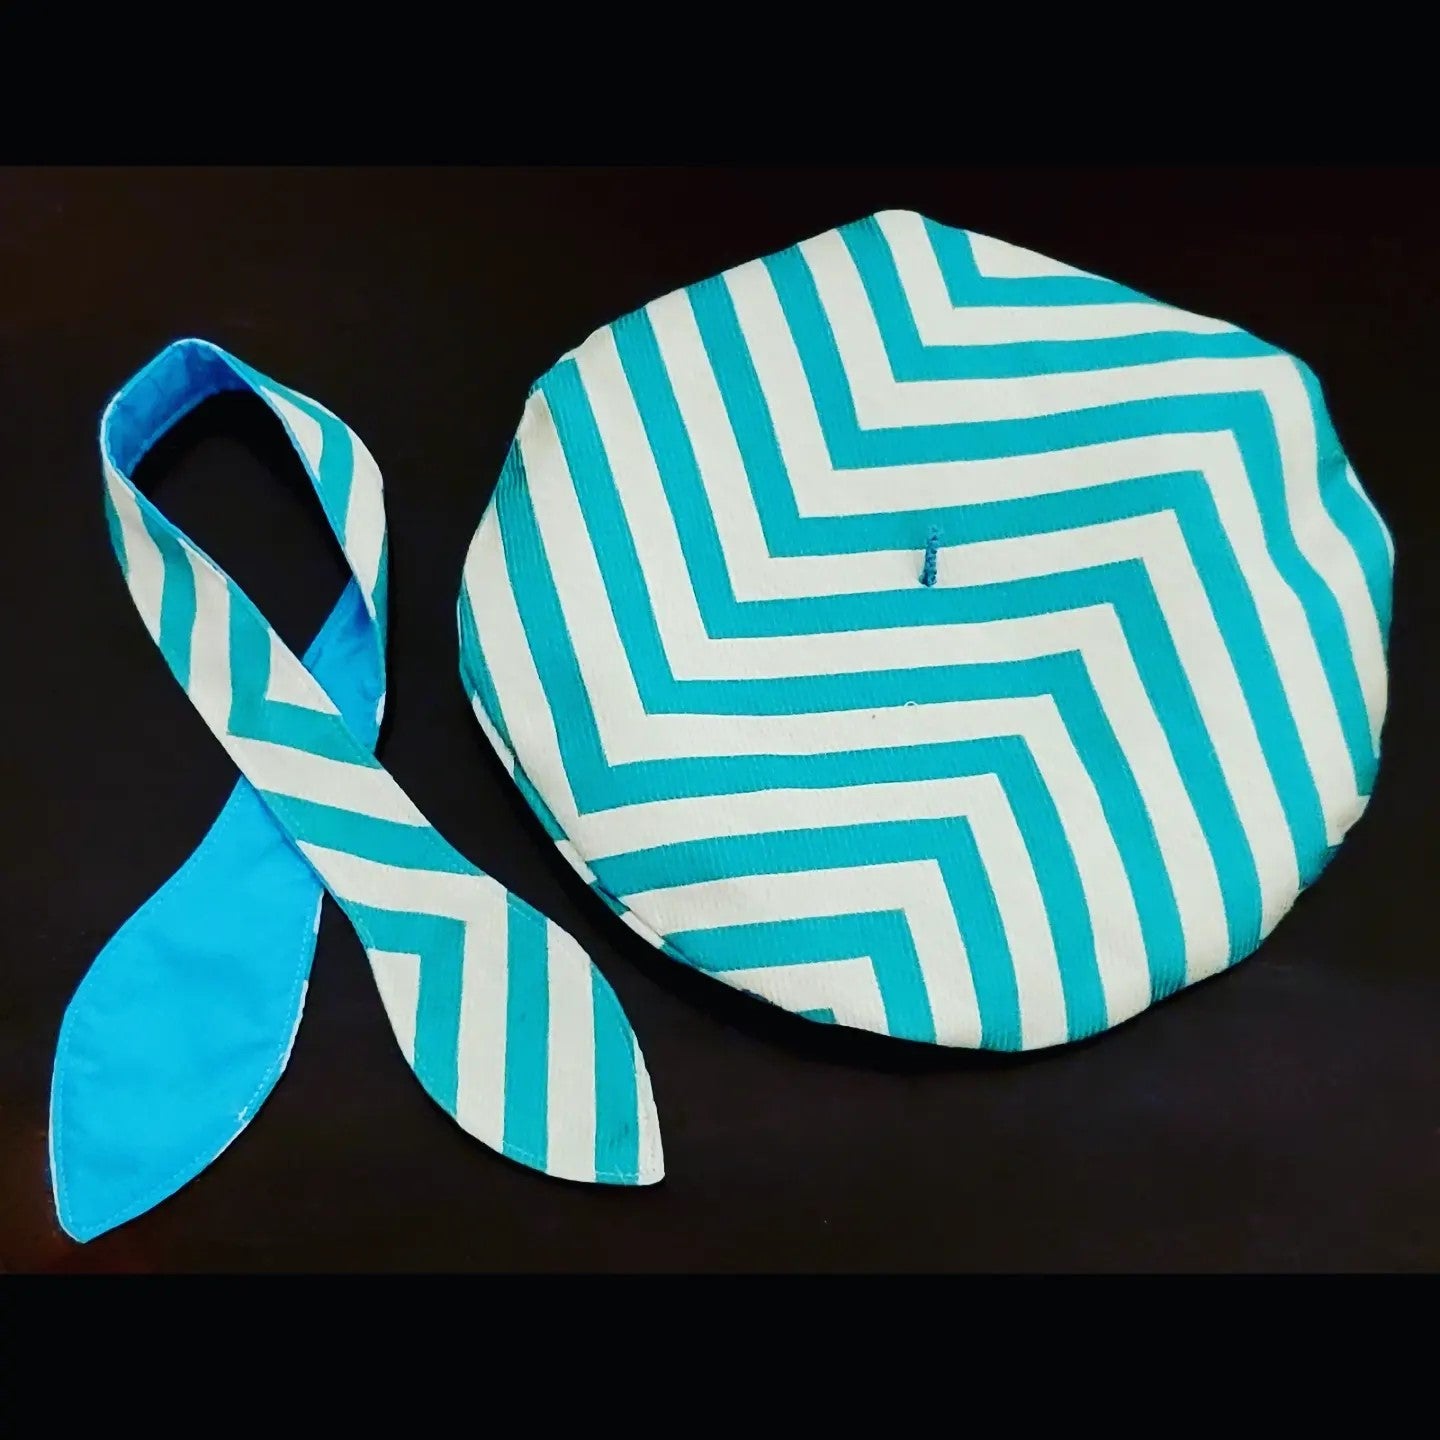 Turquoise and white chevron printed beret and matching scarf on brown background